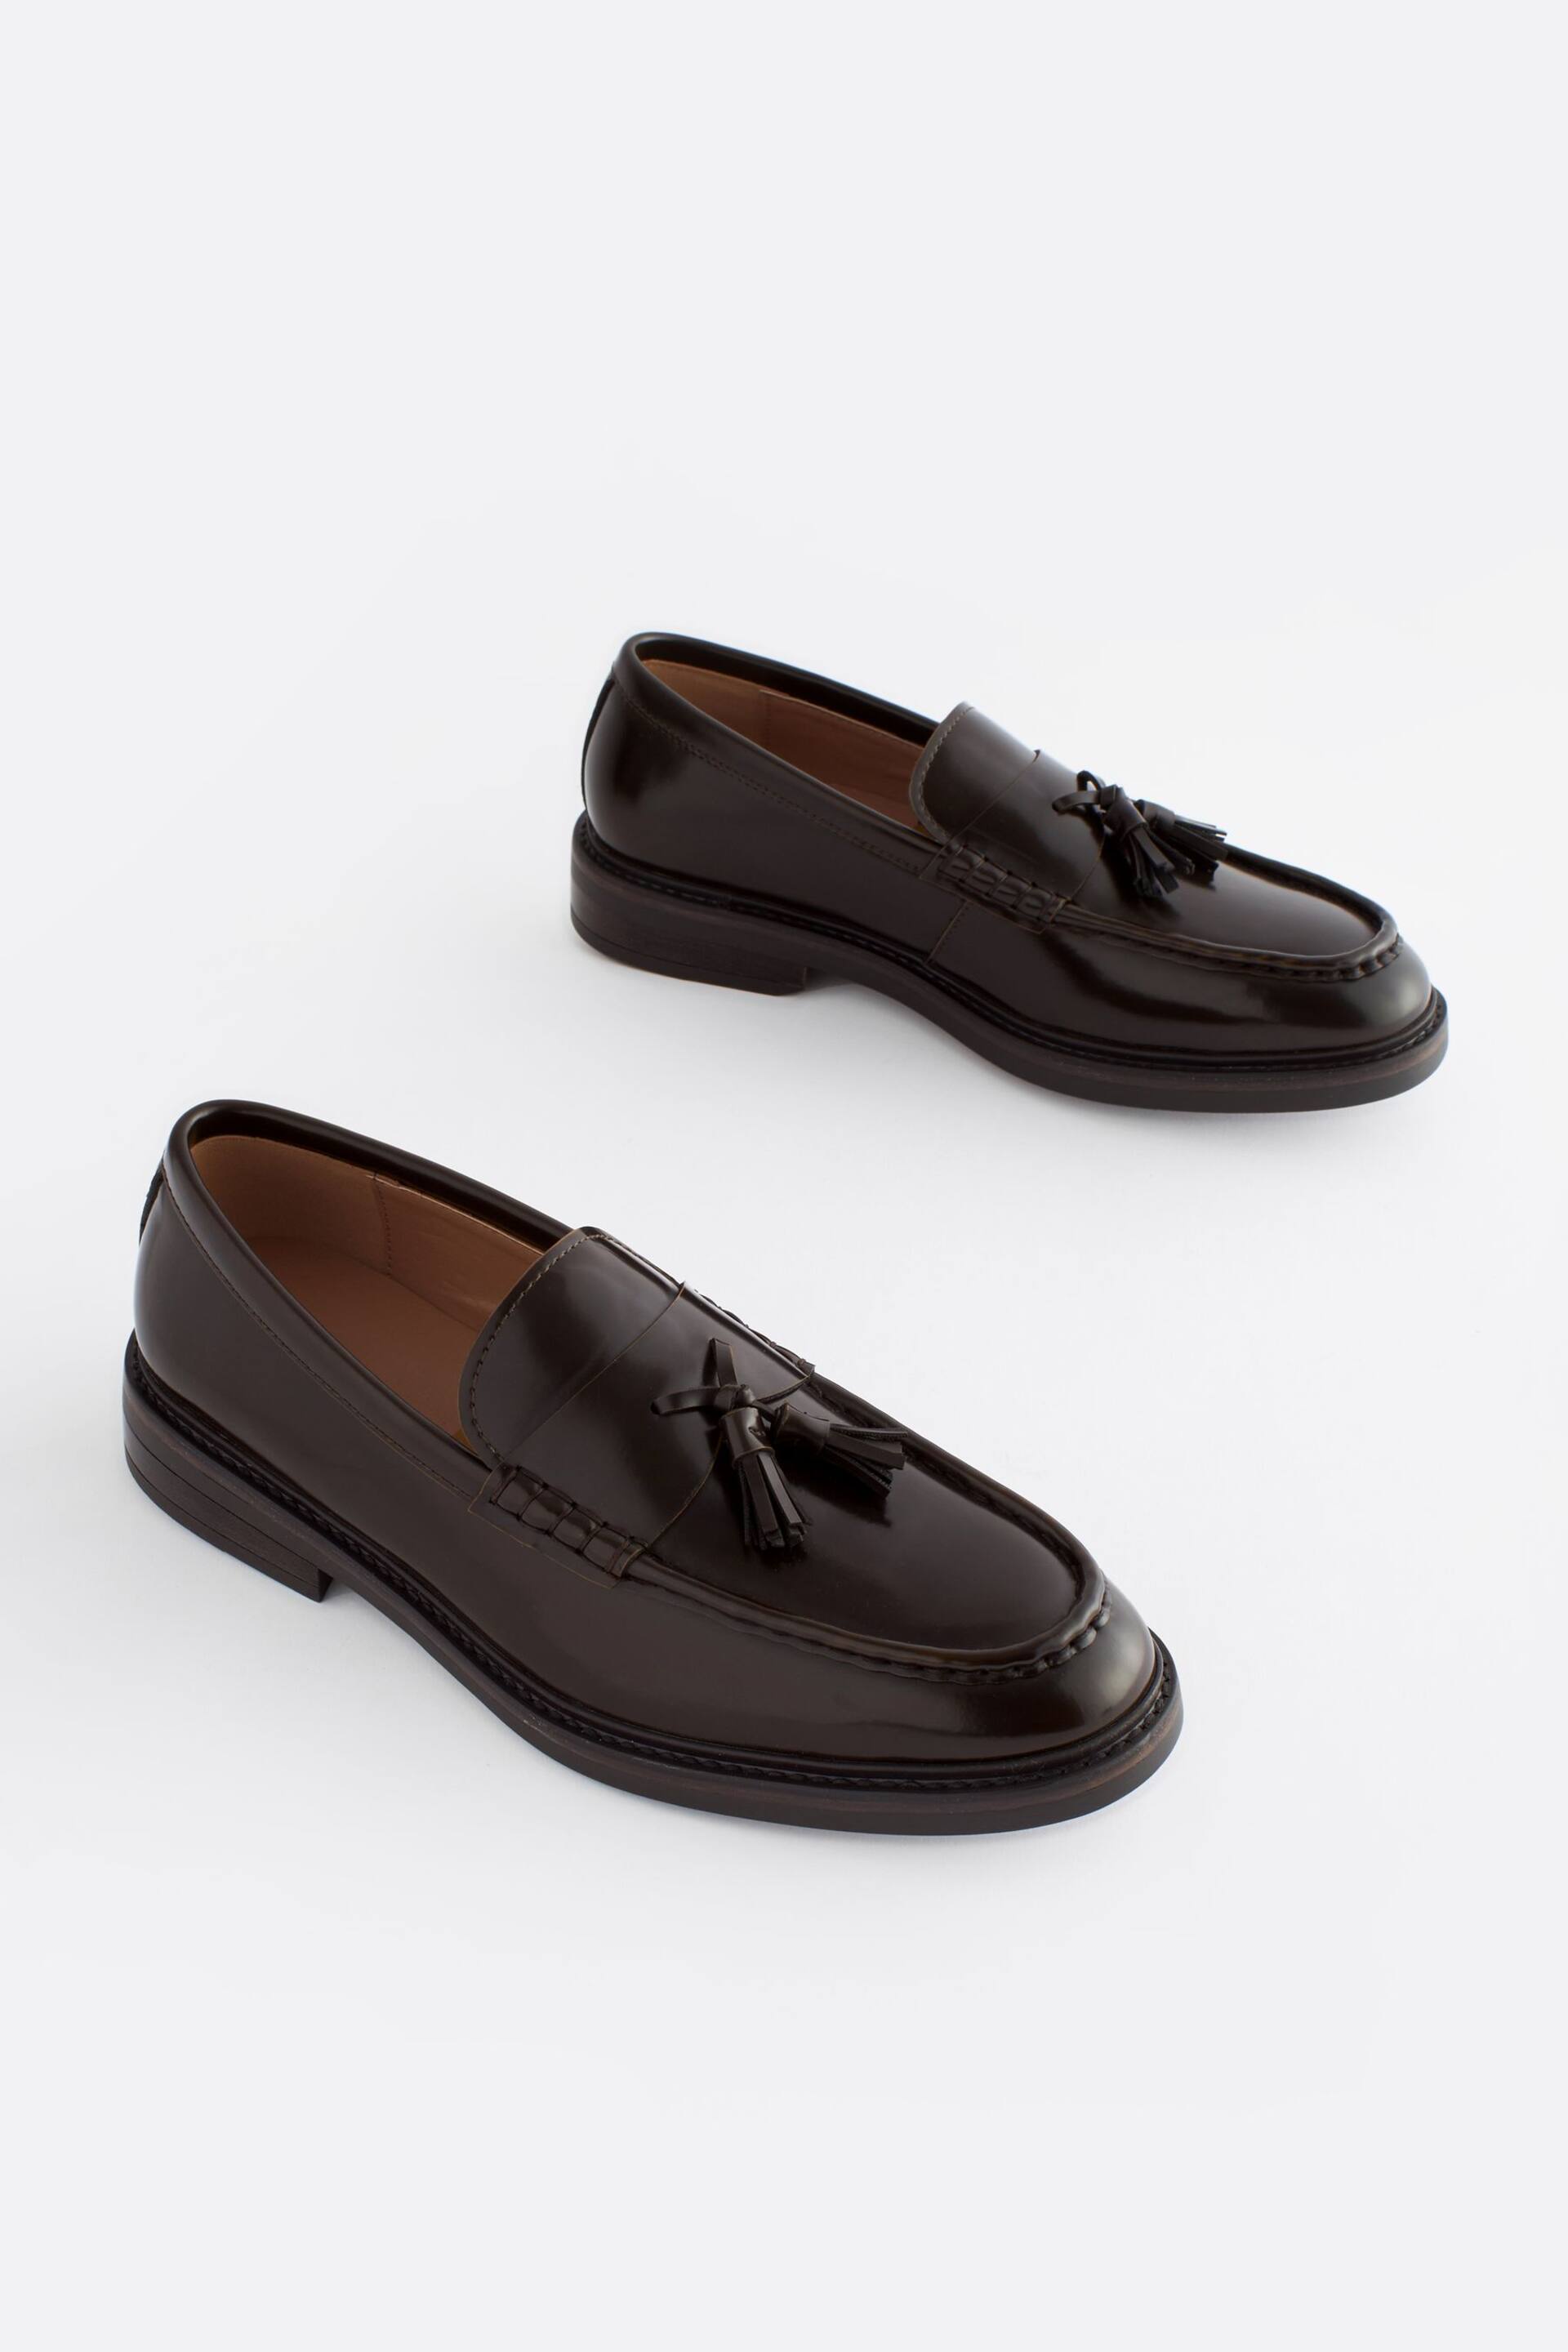 Brown Chunky Tassel Loafers - Image 2 of 7